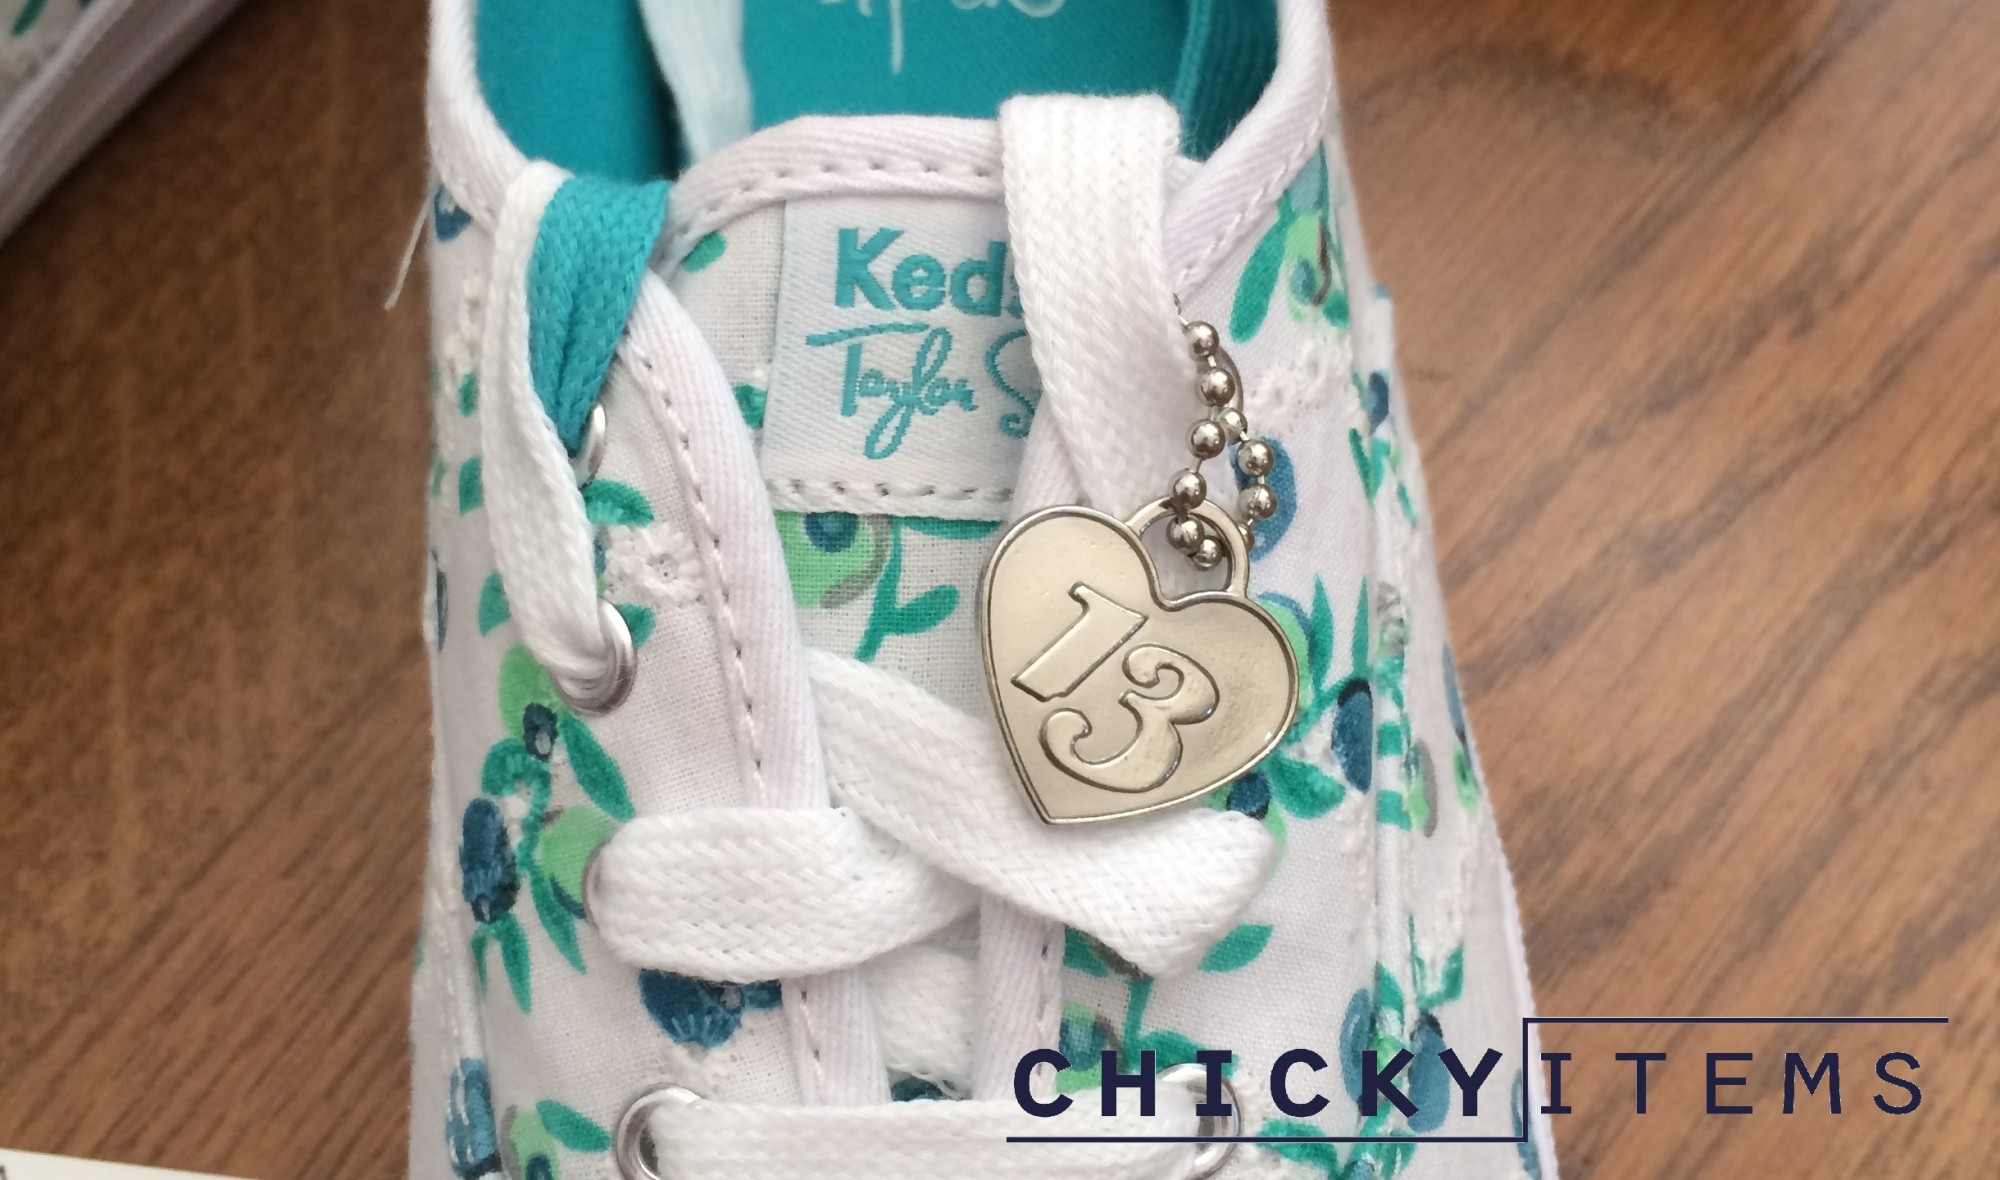 Keds Shoes Taylor Swift collection